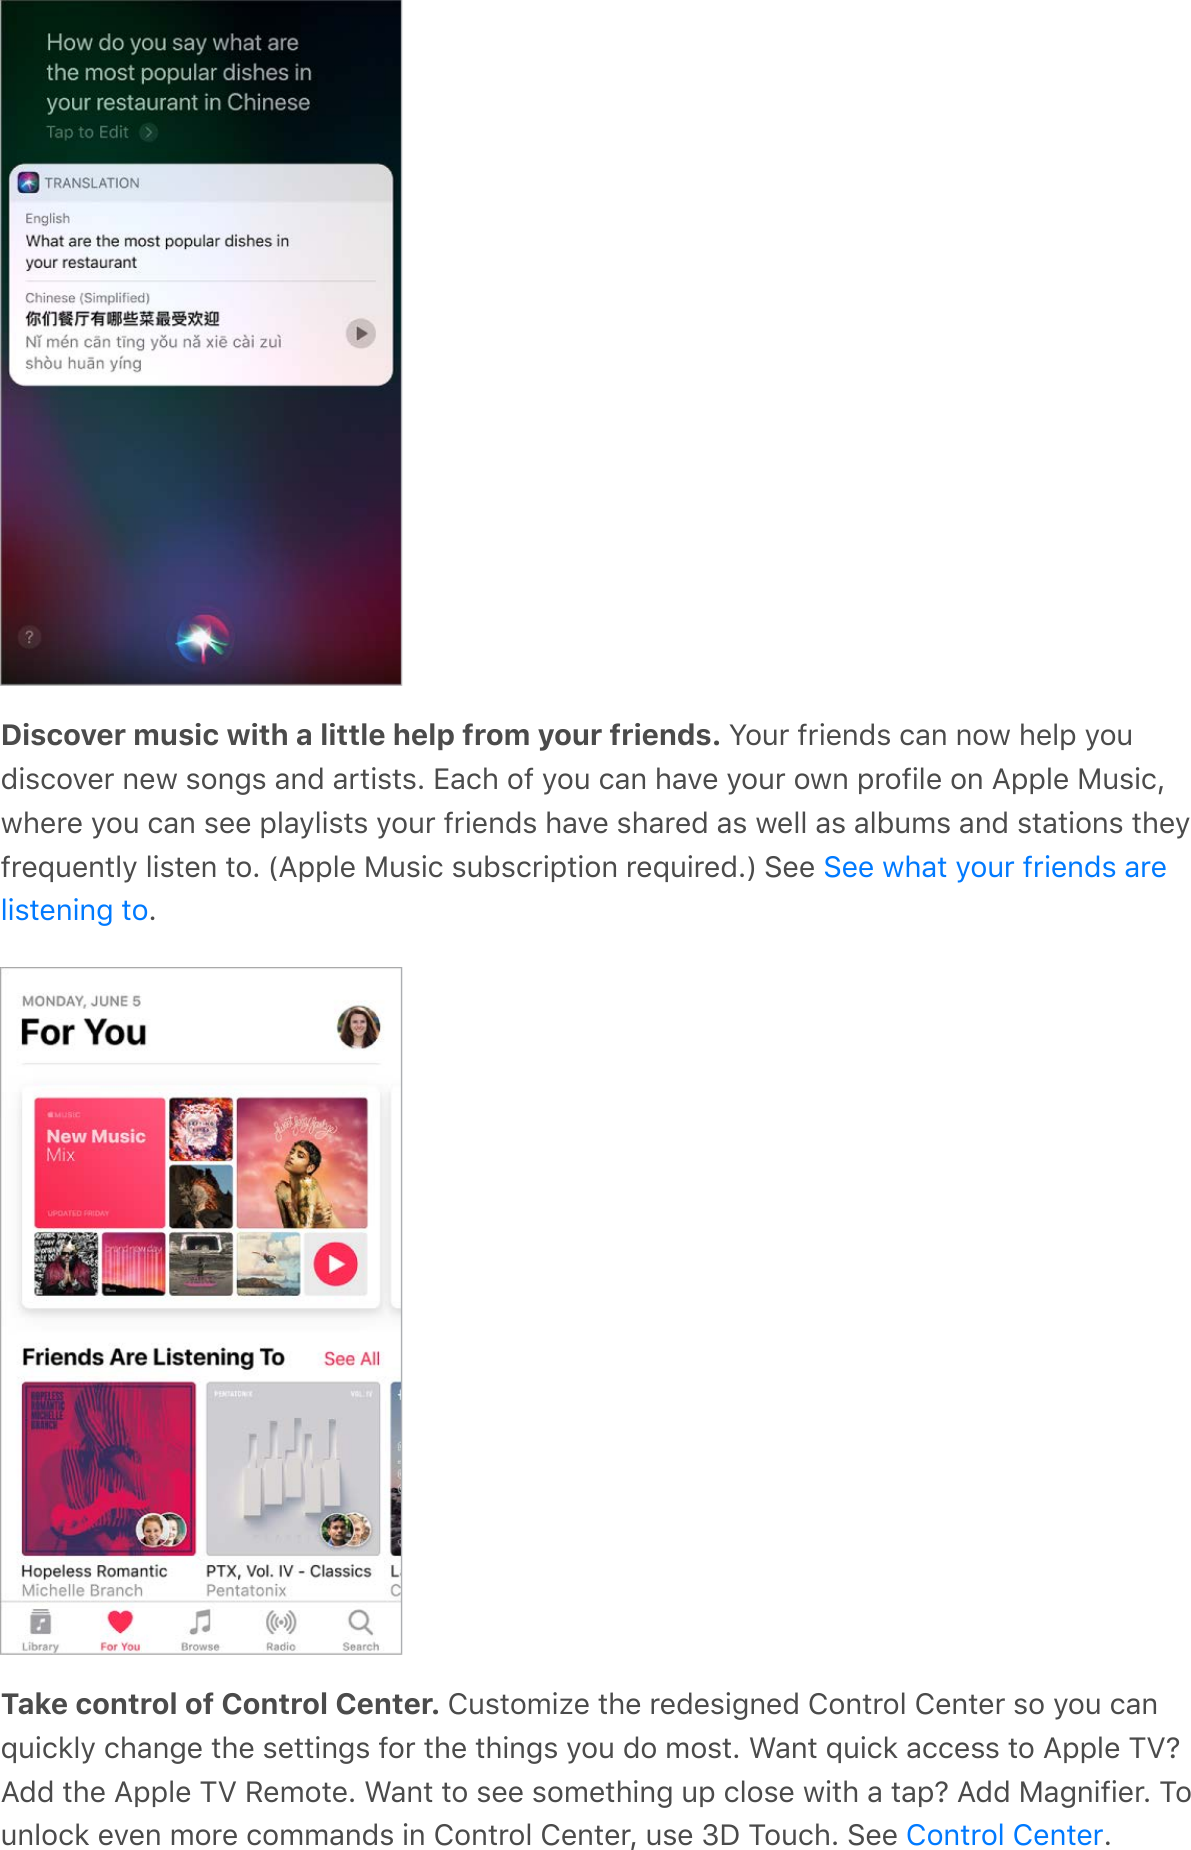 Discover music with a little help from your friends. Your friends can now help youdiscover new songs and artists. Each of you can have your own profile on Apple Music,where you can see playlists your friends have shared as well as albums and stations theyfrequently listen to. (Apple Music subscription required.) See .Take control of Control Center. Customize the redesigned Control Center so you canquickly change the settings for the things you do most. Want quick access to Apple TV?Add the Apple TV Remote. Want to see something up close with a tap? Add Magnifier. Tounlock even more commands in Control Center, use 3D Touch. See  .See what your friends arelistening toControl Center